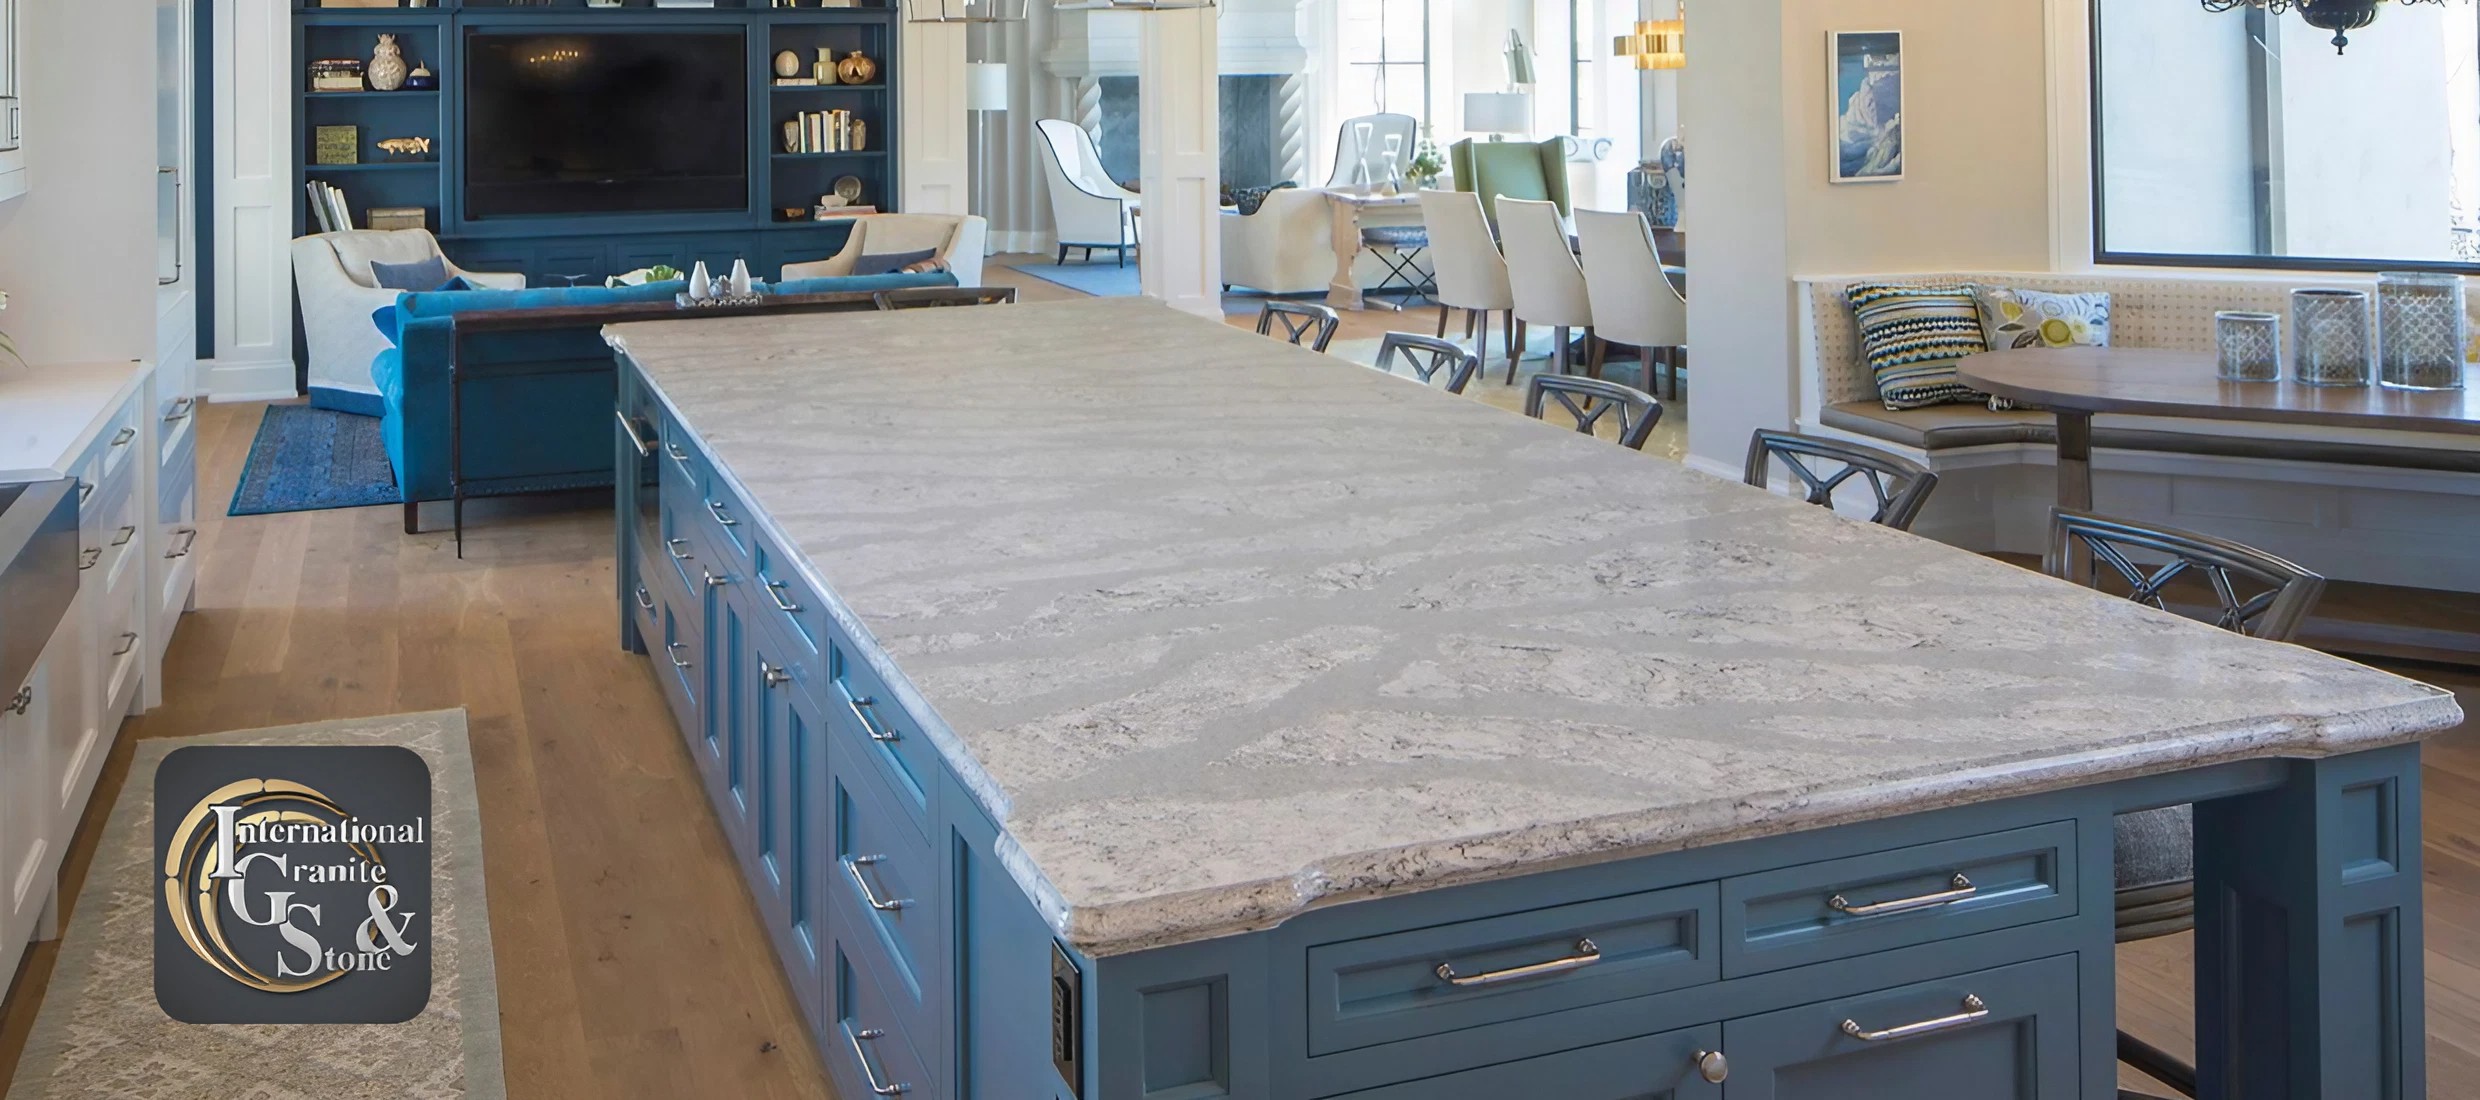 IGS Countertops, boasting over 20 years of expertise in  East Lake, Florida delivers premium countertop materials and comprehensive renovation services. As Tampa Bay's Official Cambria® Quartz Premier Dealer and the only Countertop Installer in Florida with a General Contractor's License, we ensure unparalleled craftsmanship with an unwavering emphasis on client satisfaction.